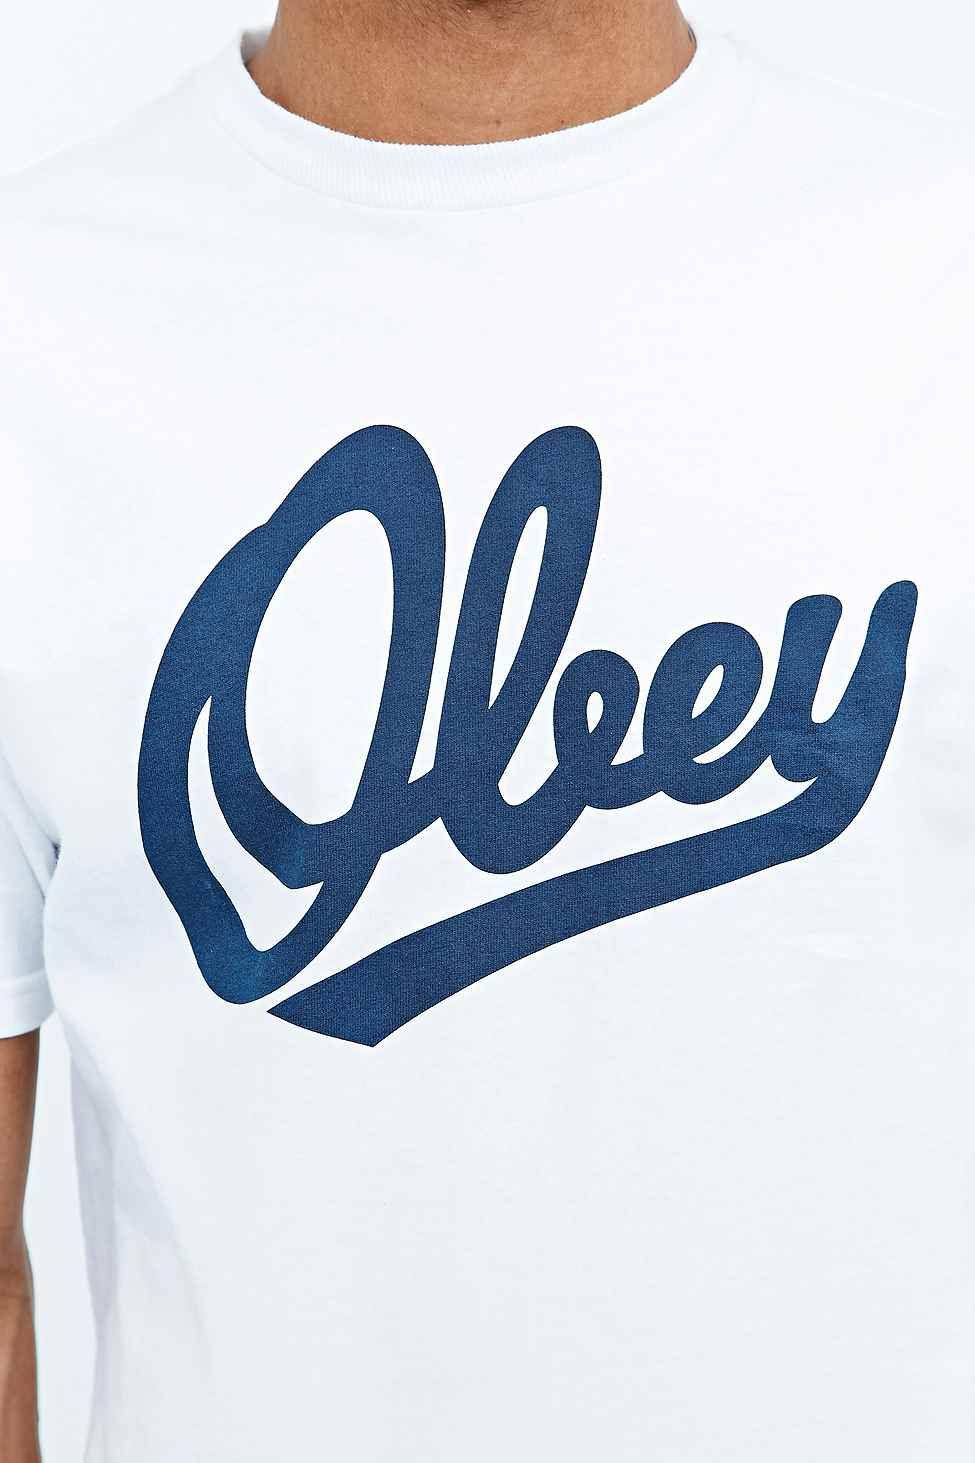 Team Obey Logo - Obey Team Logo Tee In White in White for Men - Lyst